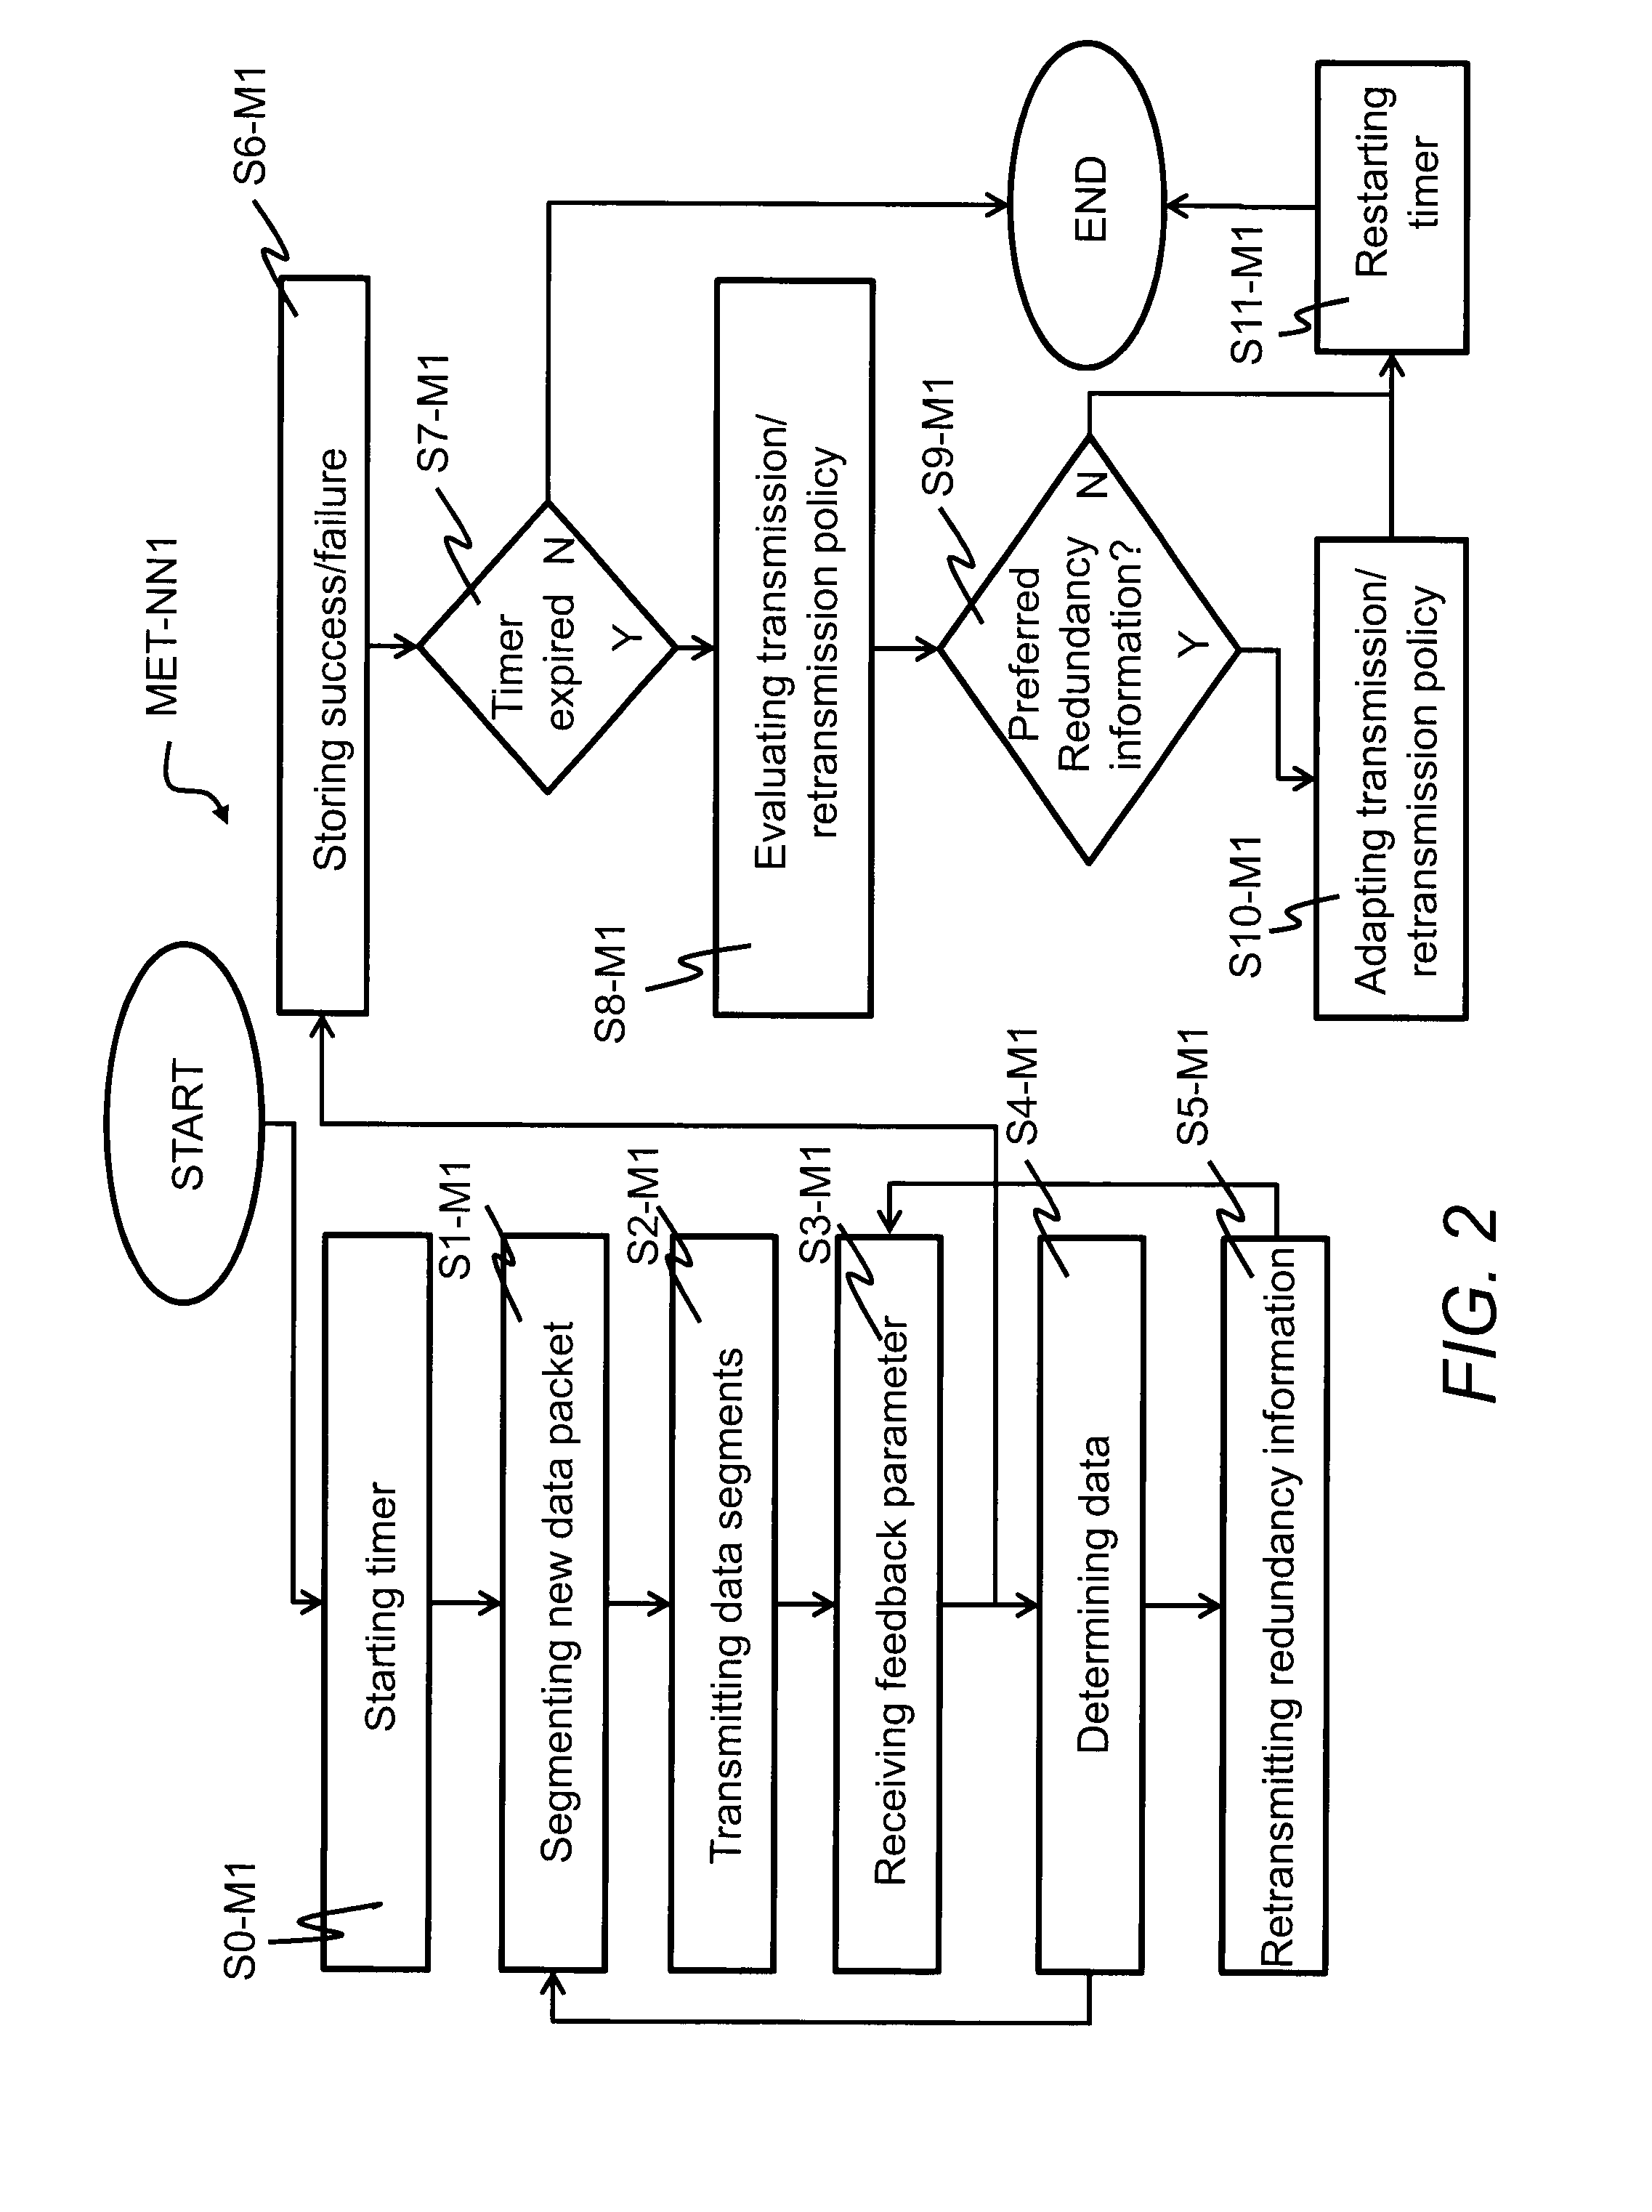 Method for a first network node for transmitting or retransmitting data to a second network node and first network node thereof and method for a second network node for receiving data transmitted or retransmitted from a first network node and second network node thereof